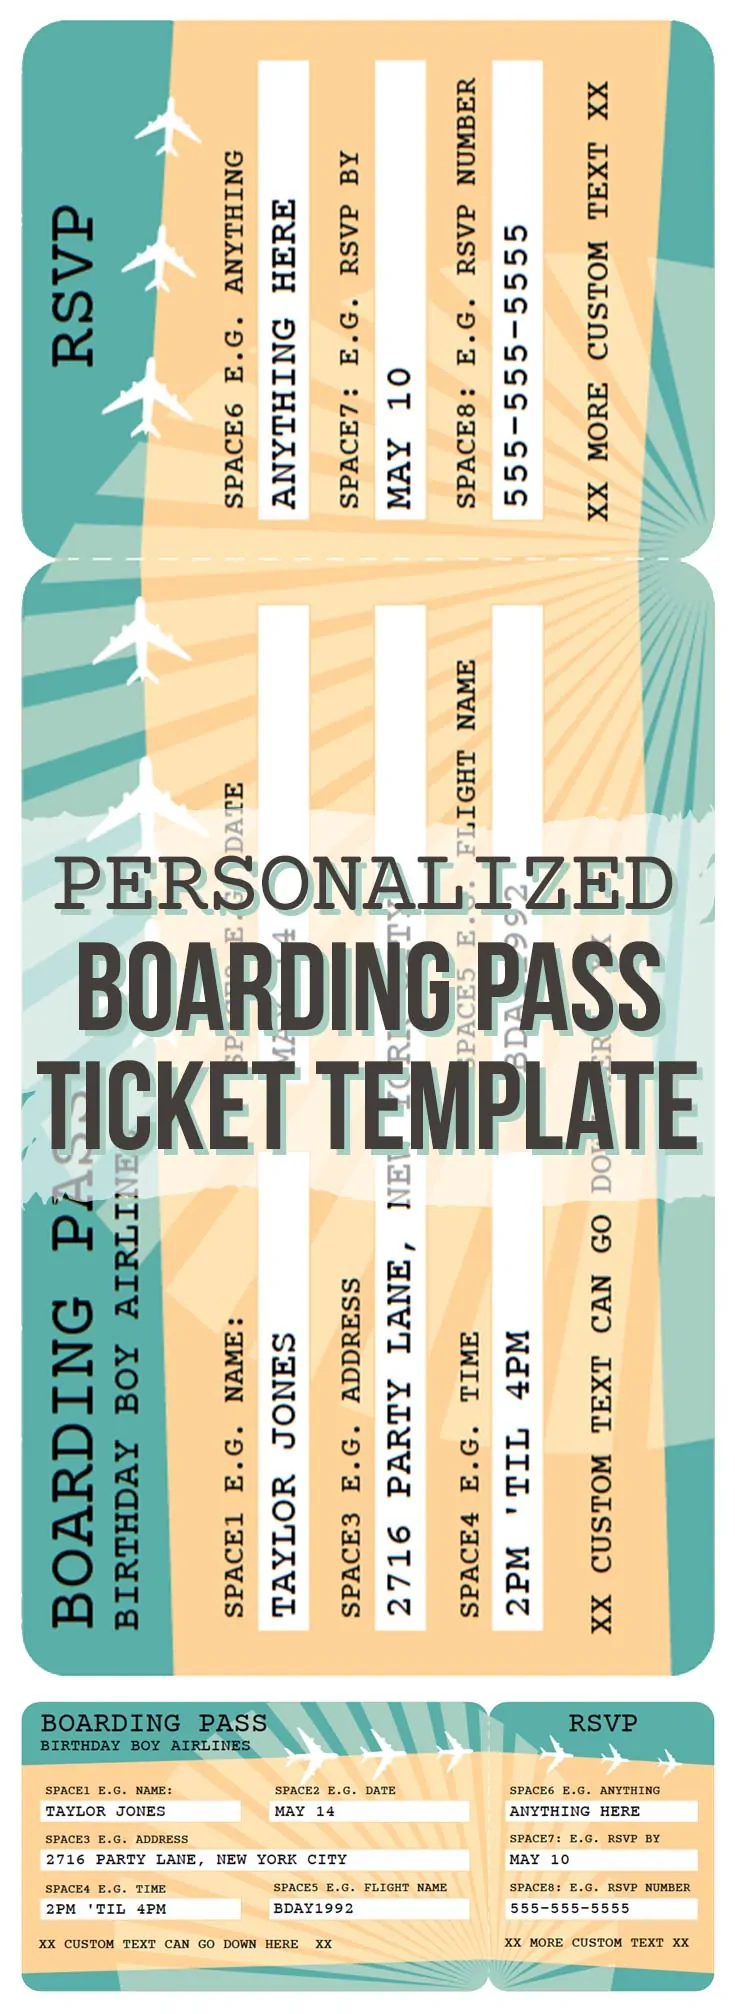 printable-airline-boarding-pass-template-free-printables-online